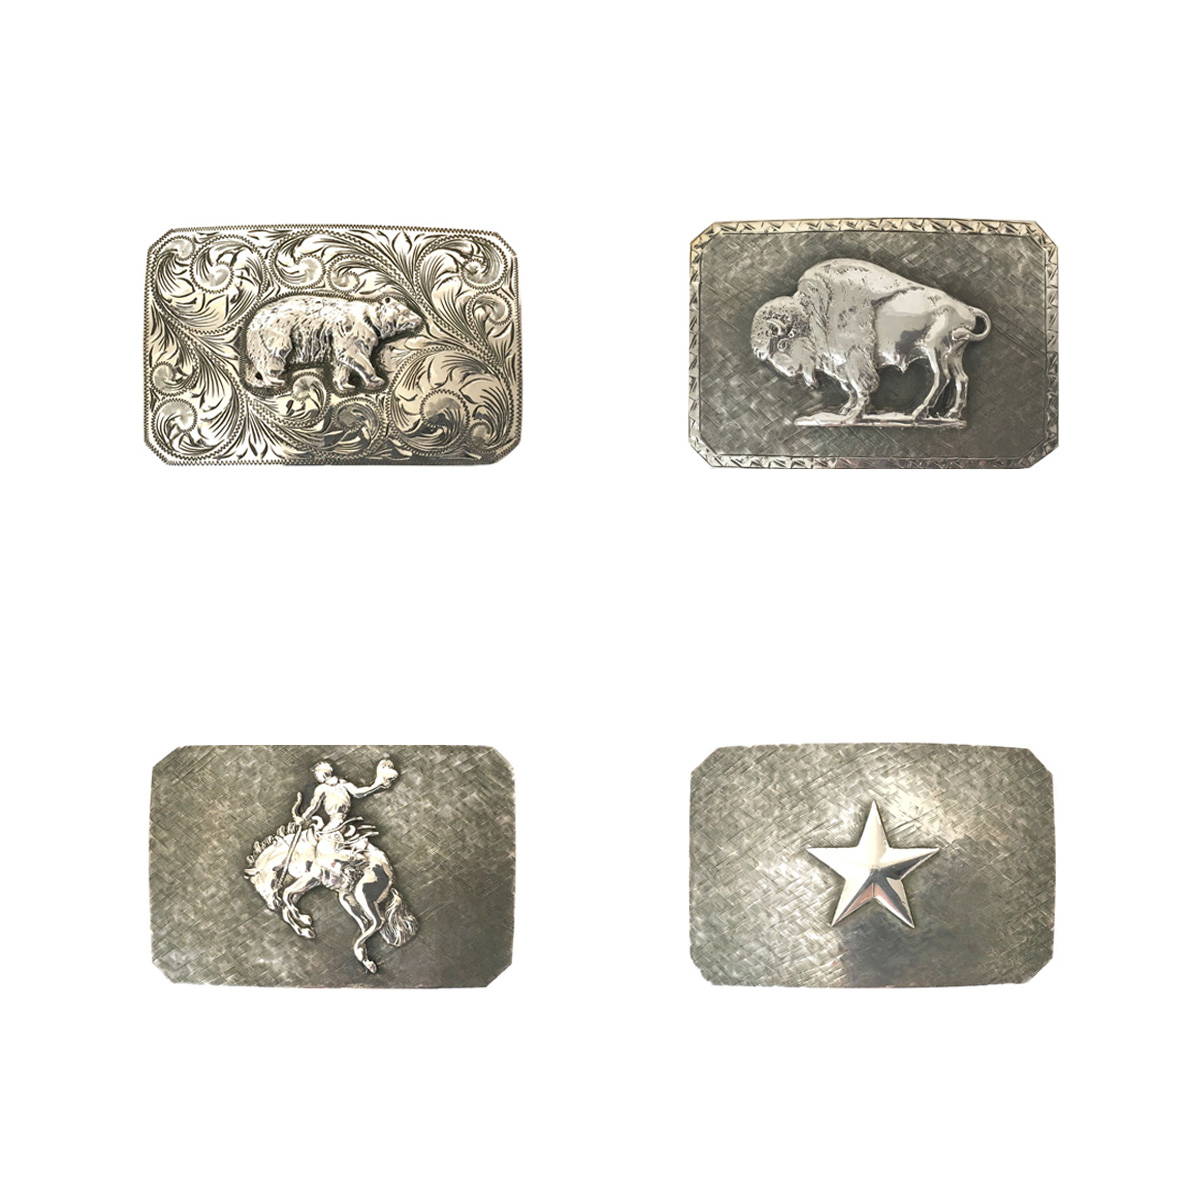 Display of western-style sterling silver belt buckles with bear, bison, bronco and star design